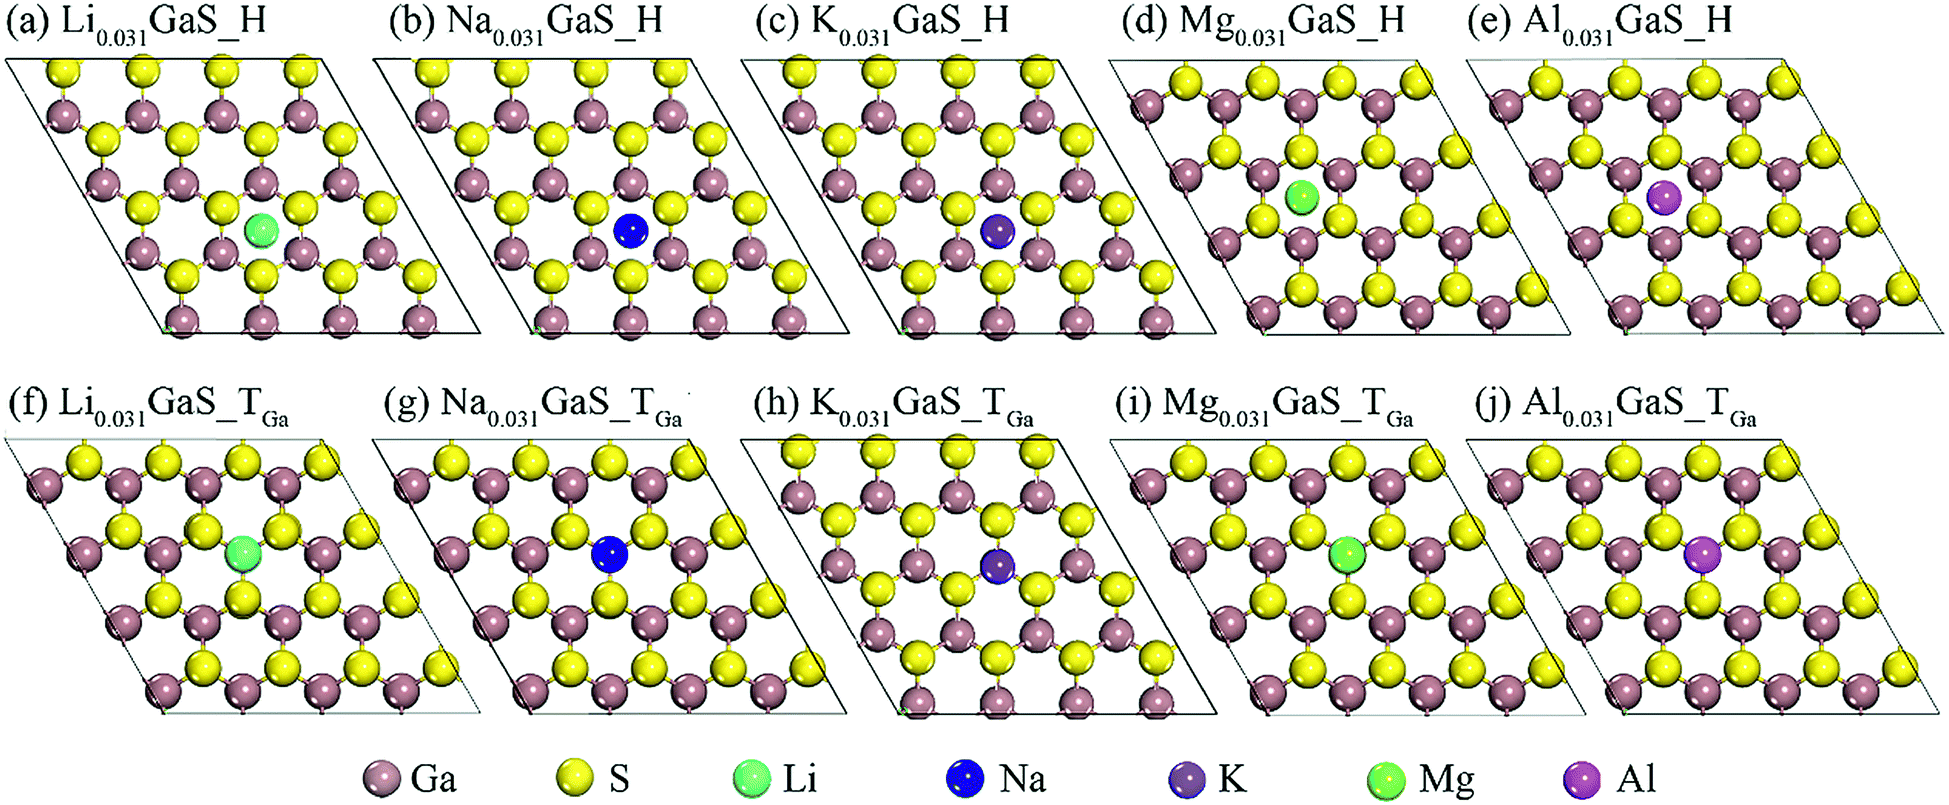 Monolayer Gas With High Ion Mobility And Capacity As A Promising Anode Battery Material Journal Of Materials Chemistry A Rsc Publishing